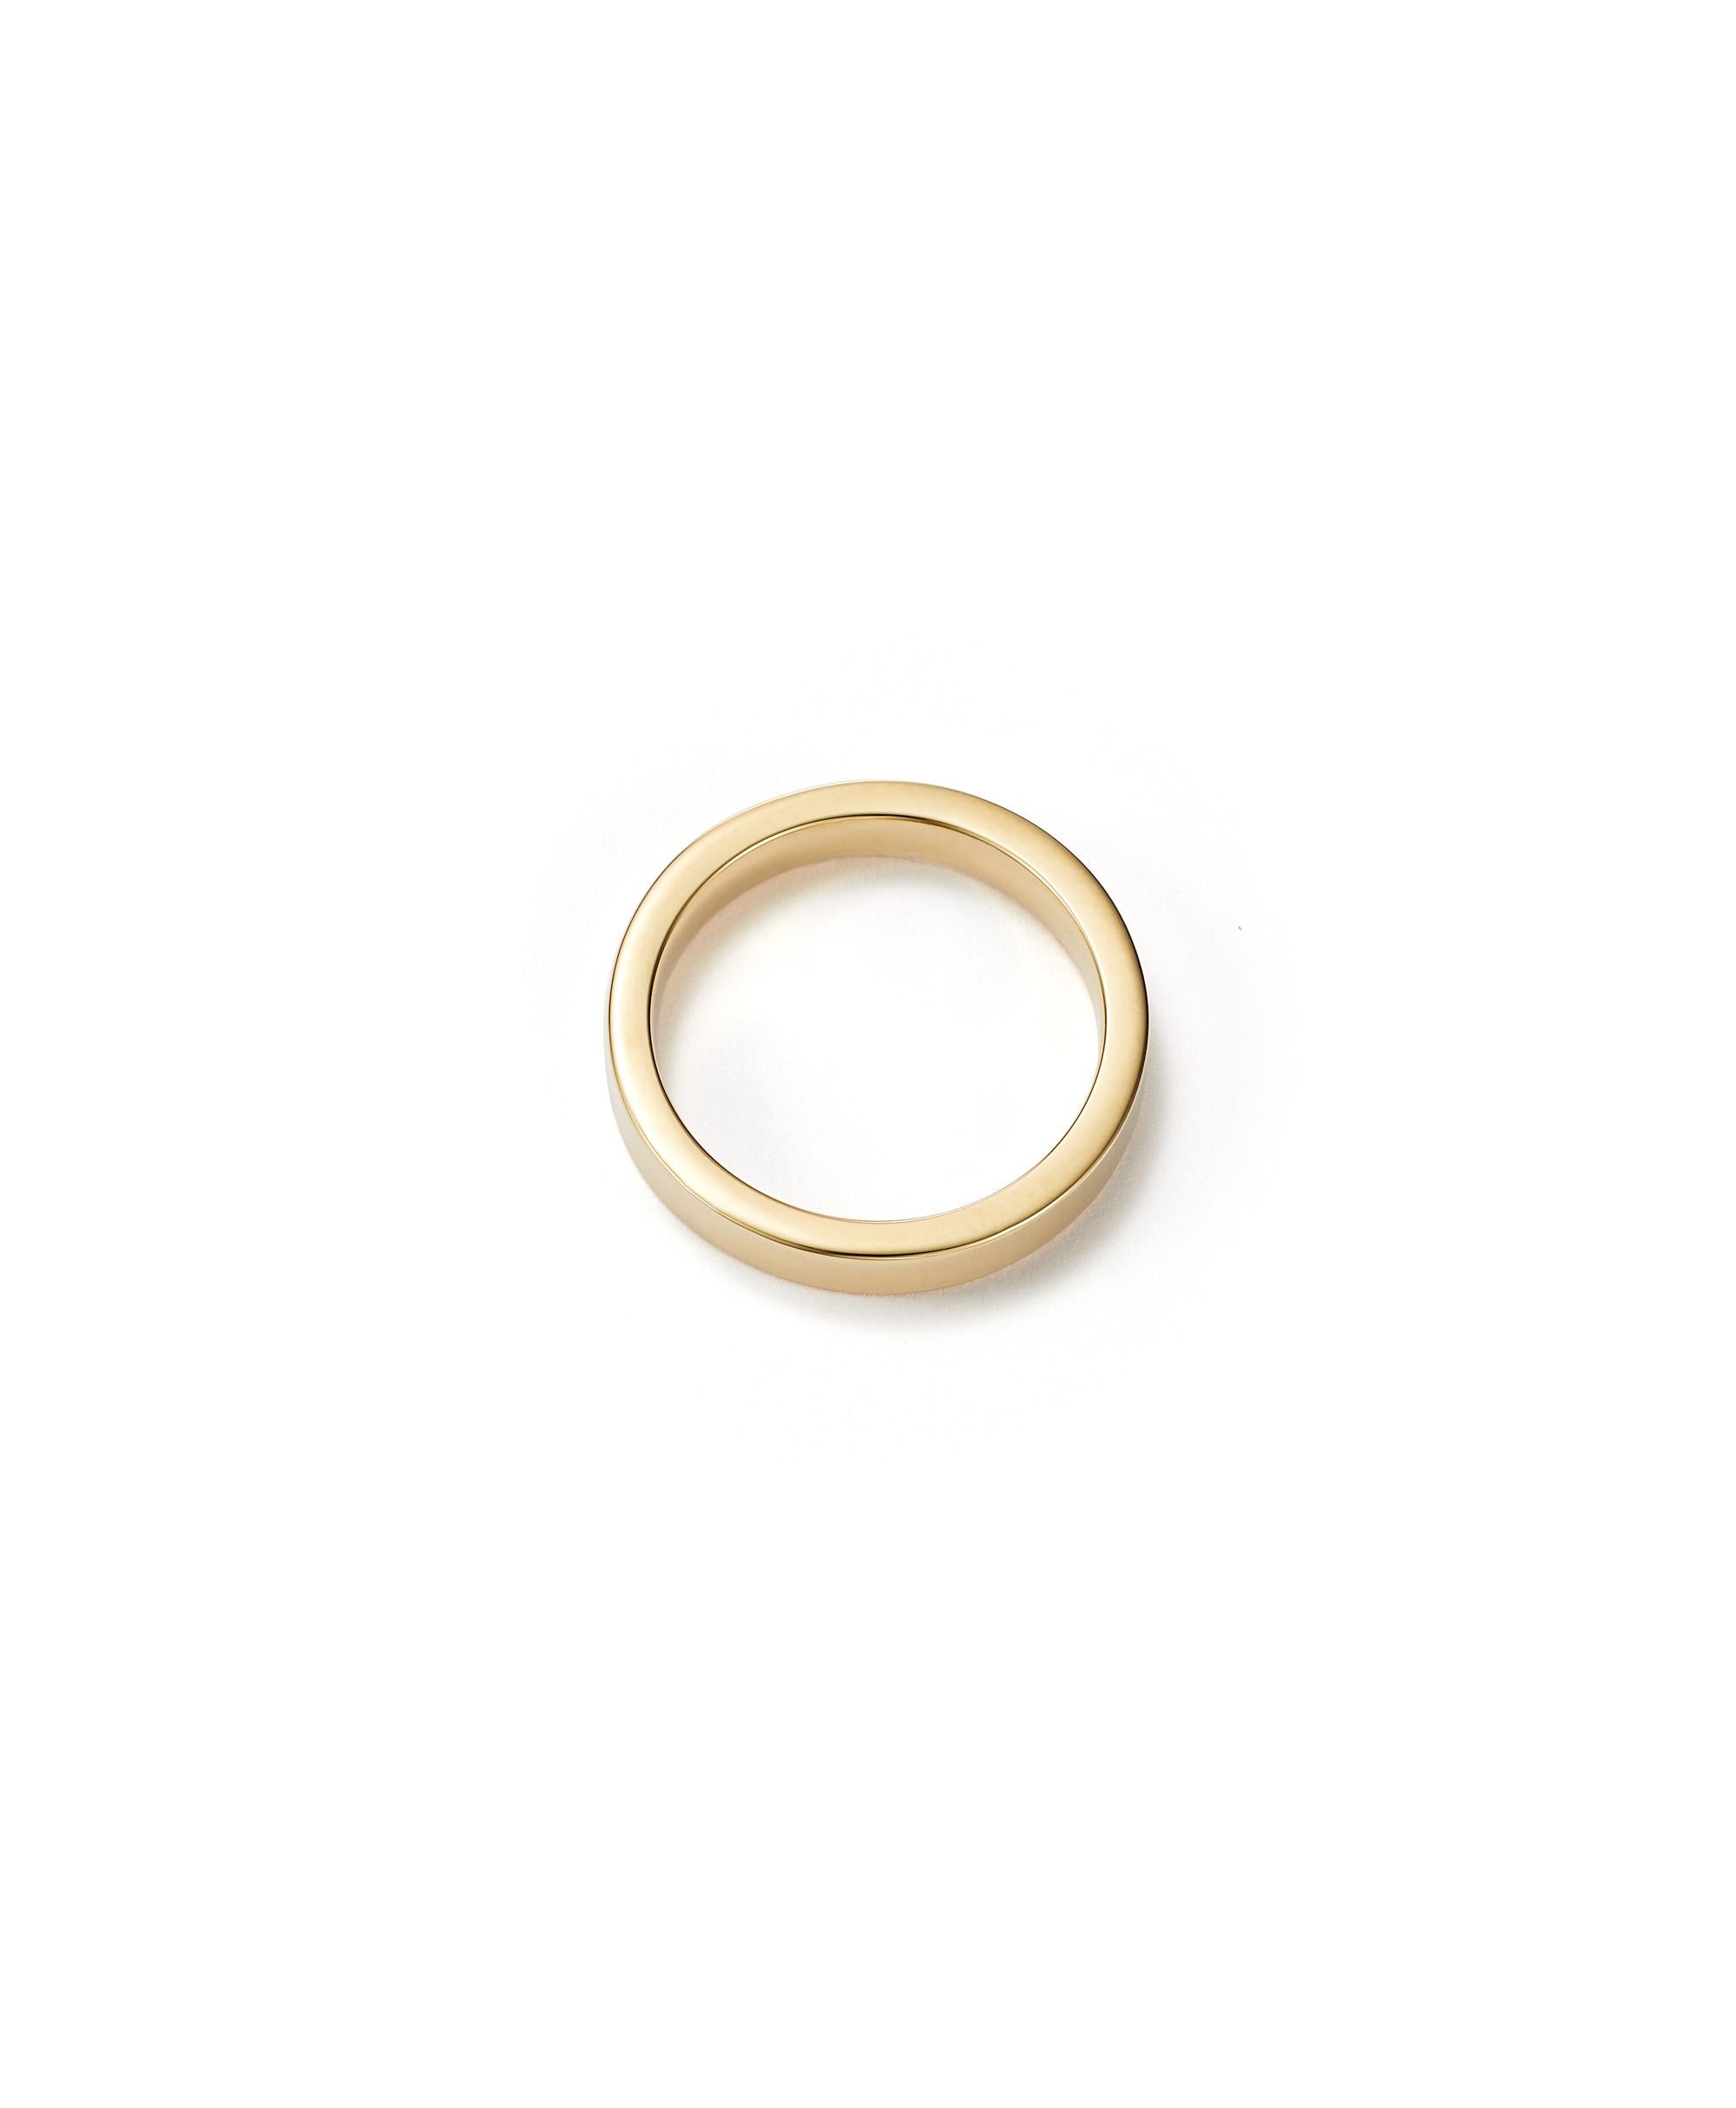 Your love and values are in full view with this classic wedding band.

Handcrafted in NYC with 18kt certified Fairmined Ecological gold that is toxic chemical free, sustainable, ethical and clean. Width 3.25 mm.

Each ring is custom made to order,